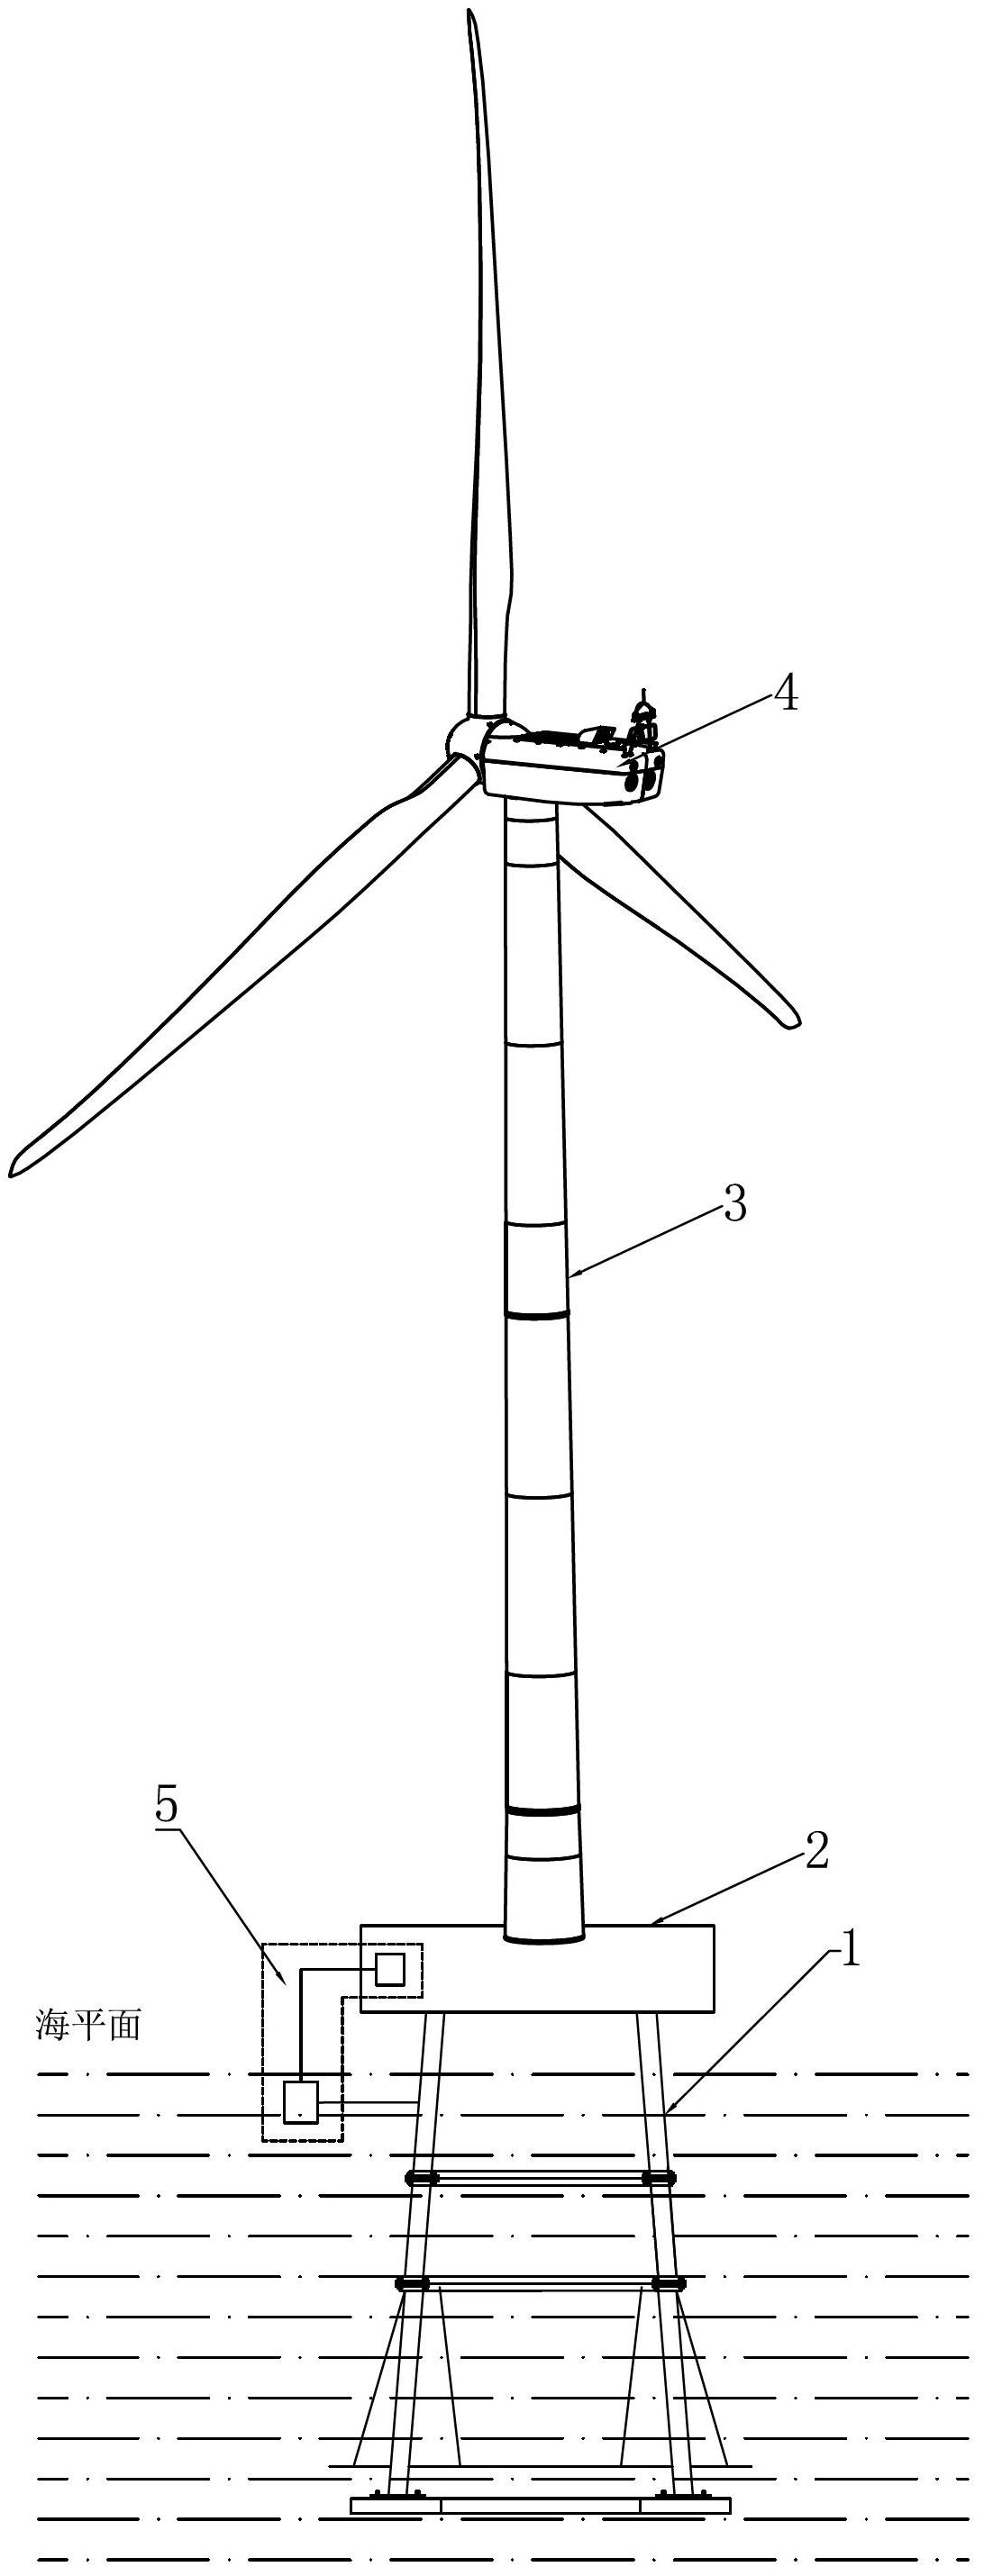 Offshore wind turbine comprising impressed current cathode anticorrosion protection and monitoring device